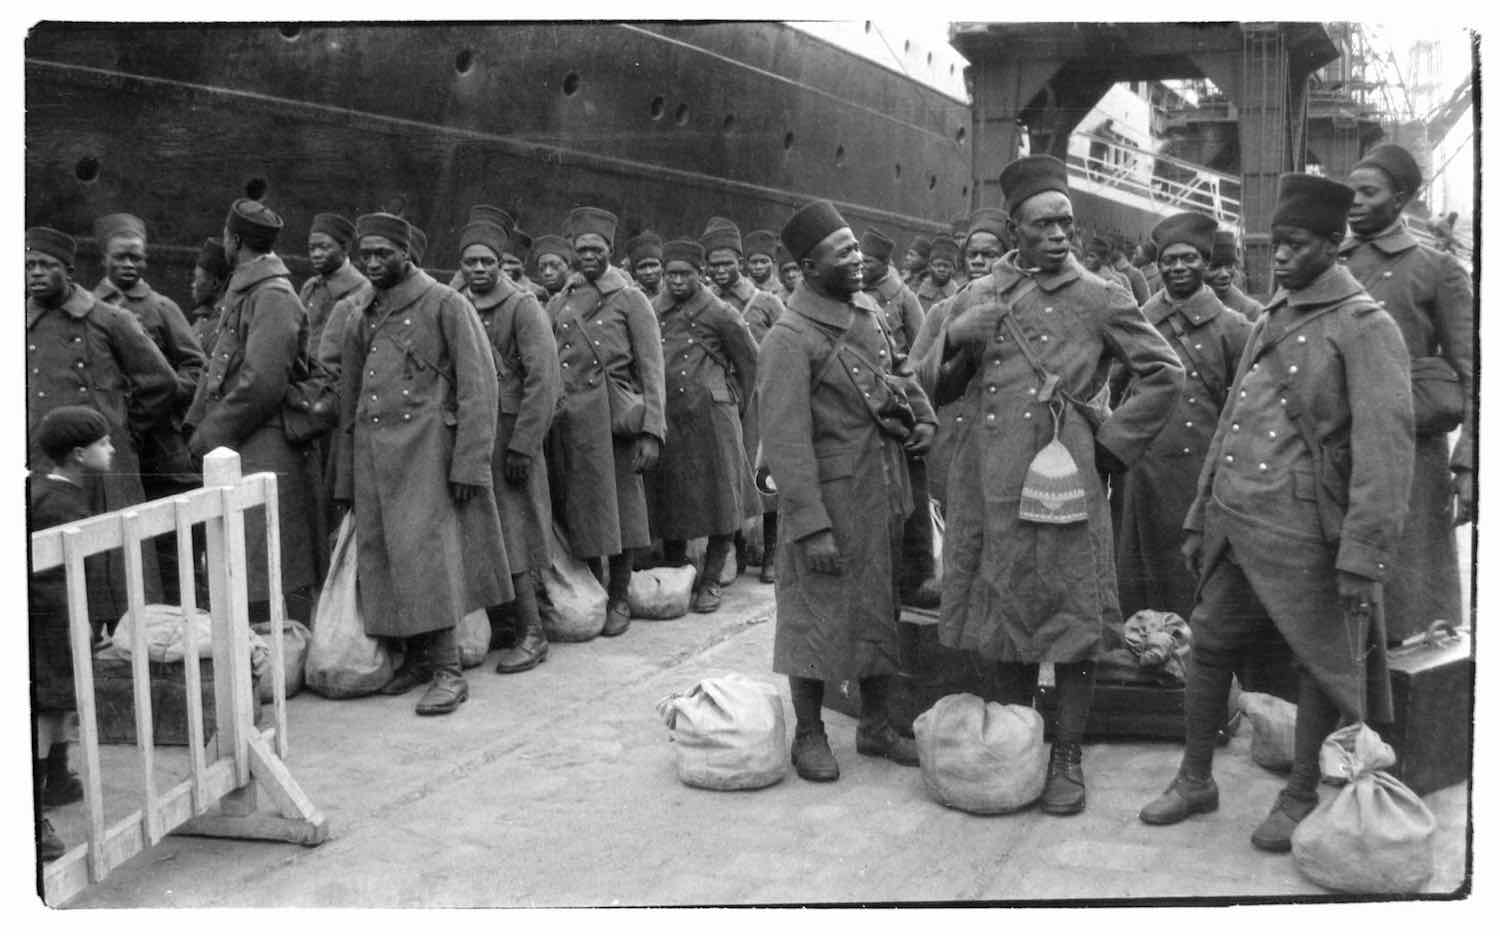 Senegalese soldiers in front of ship - Lutetia?